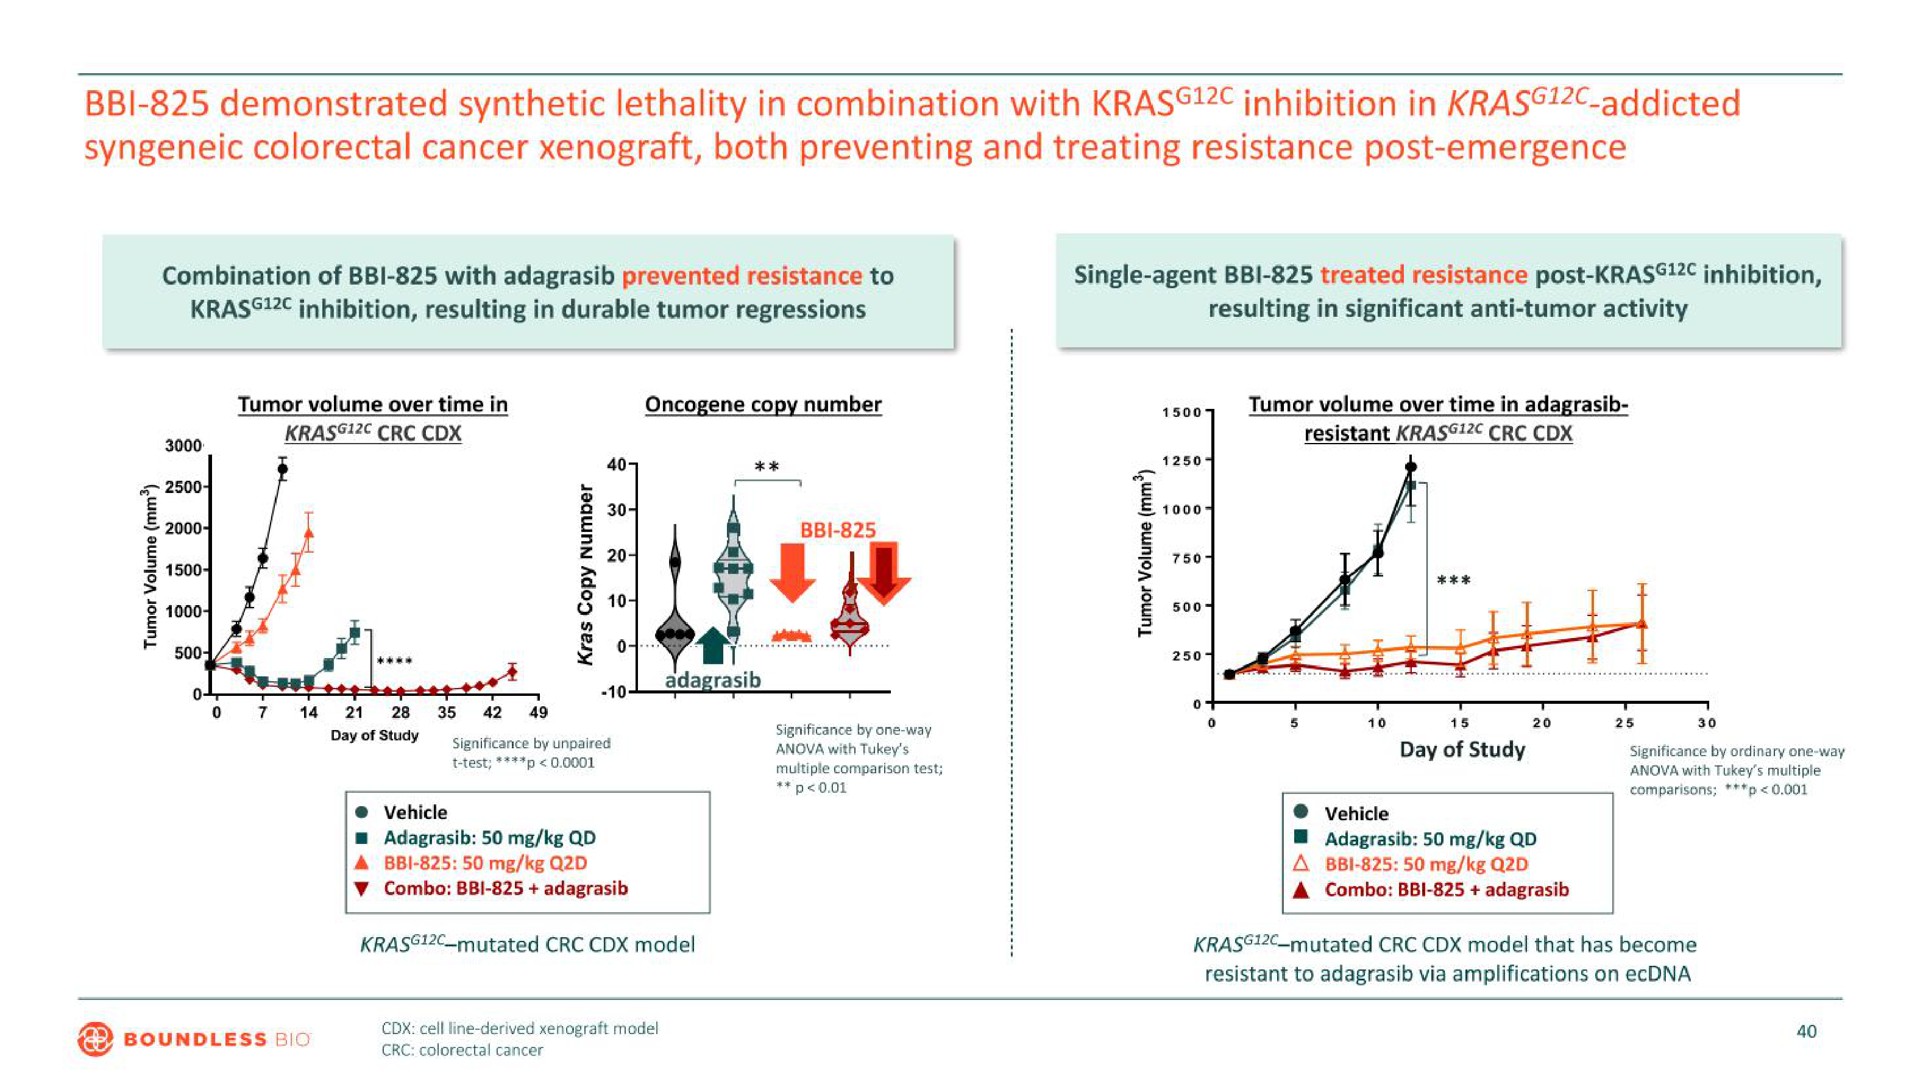 demonstrated synthetic lethality in combination with kras inhibition in kras addicted cancer both preventing and treating resistance post emergence | Boundless Bio